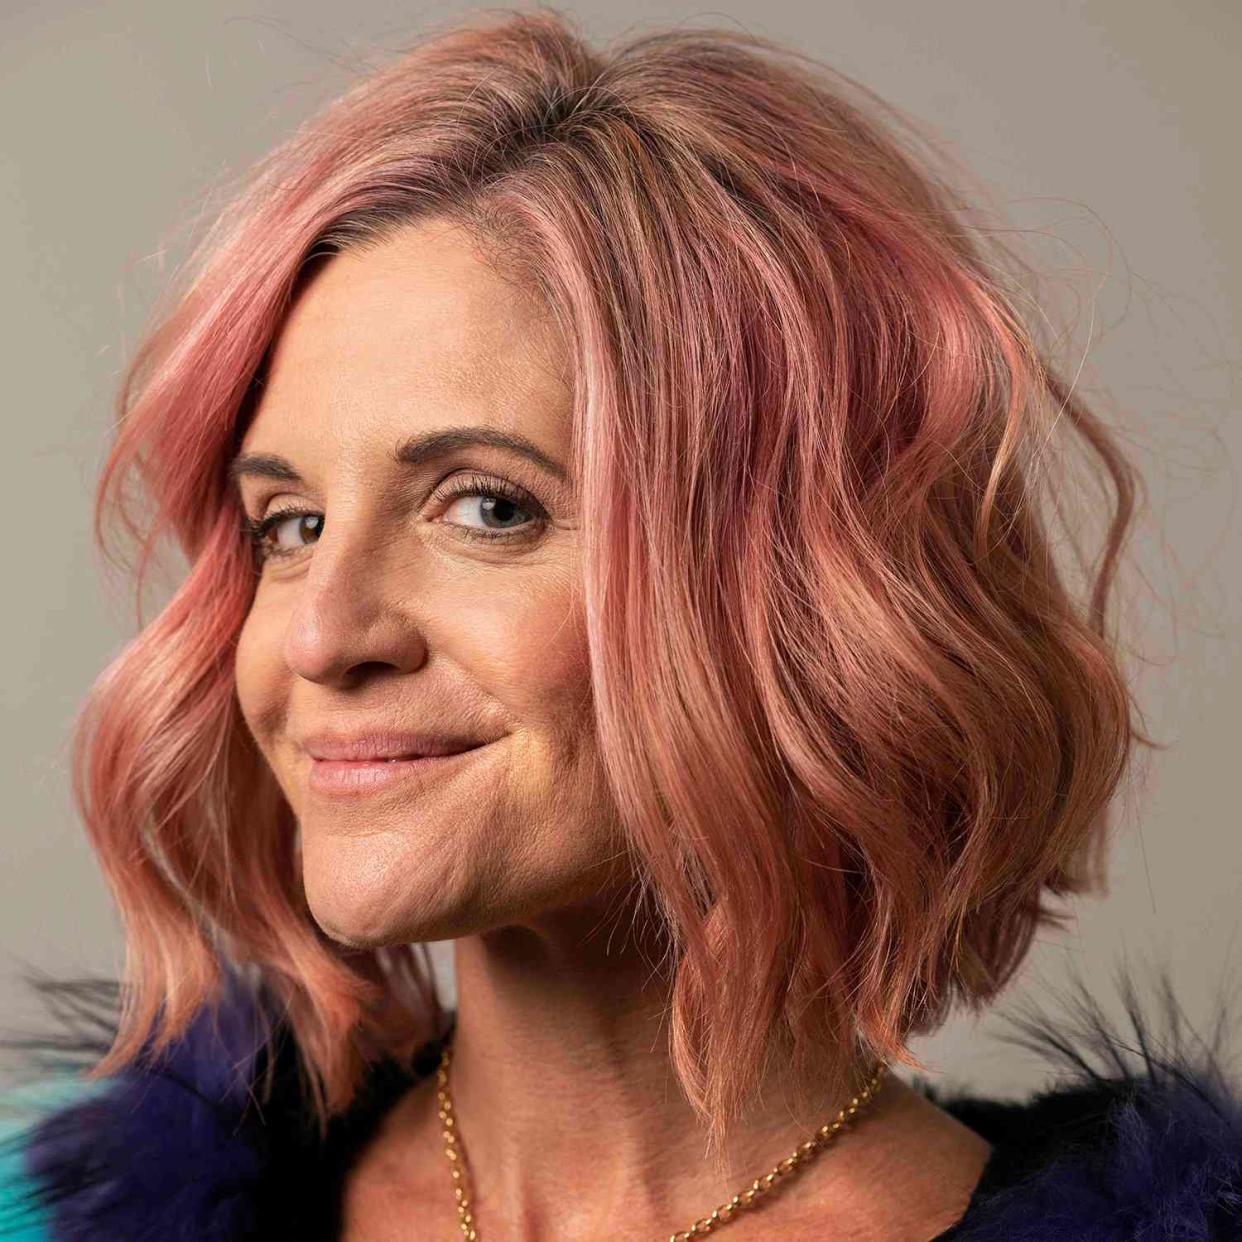 Glennon Doyle Says She Had to Share Bulimia Relapse on Her Podcast: ‘It Was Hard for Me Not to’